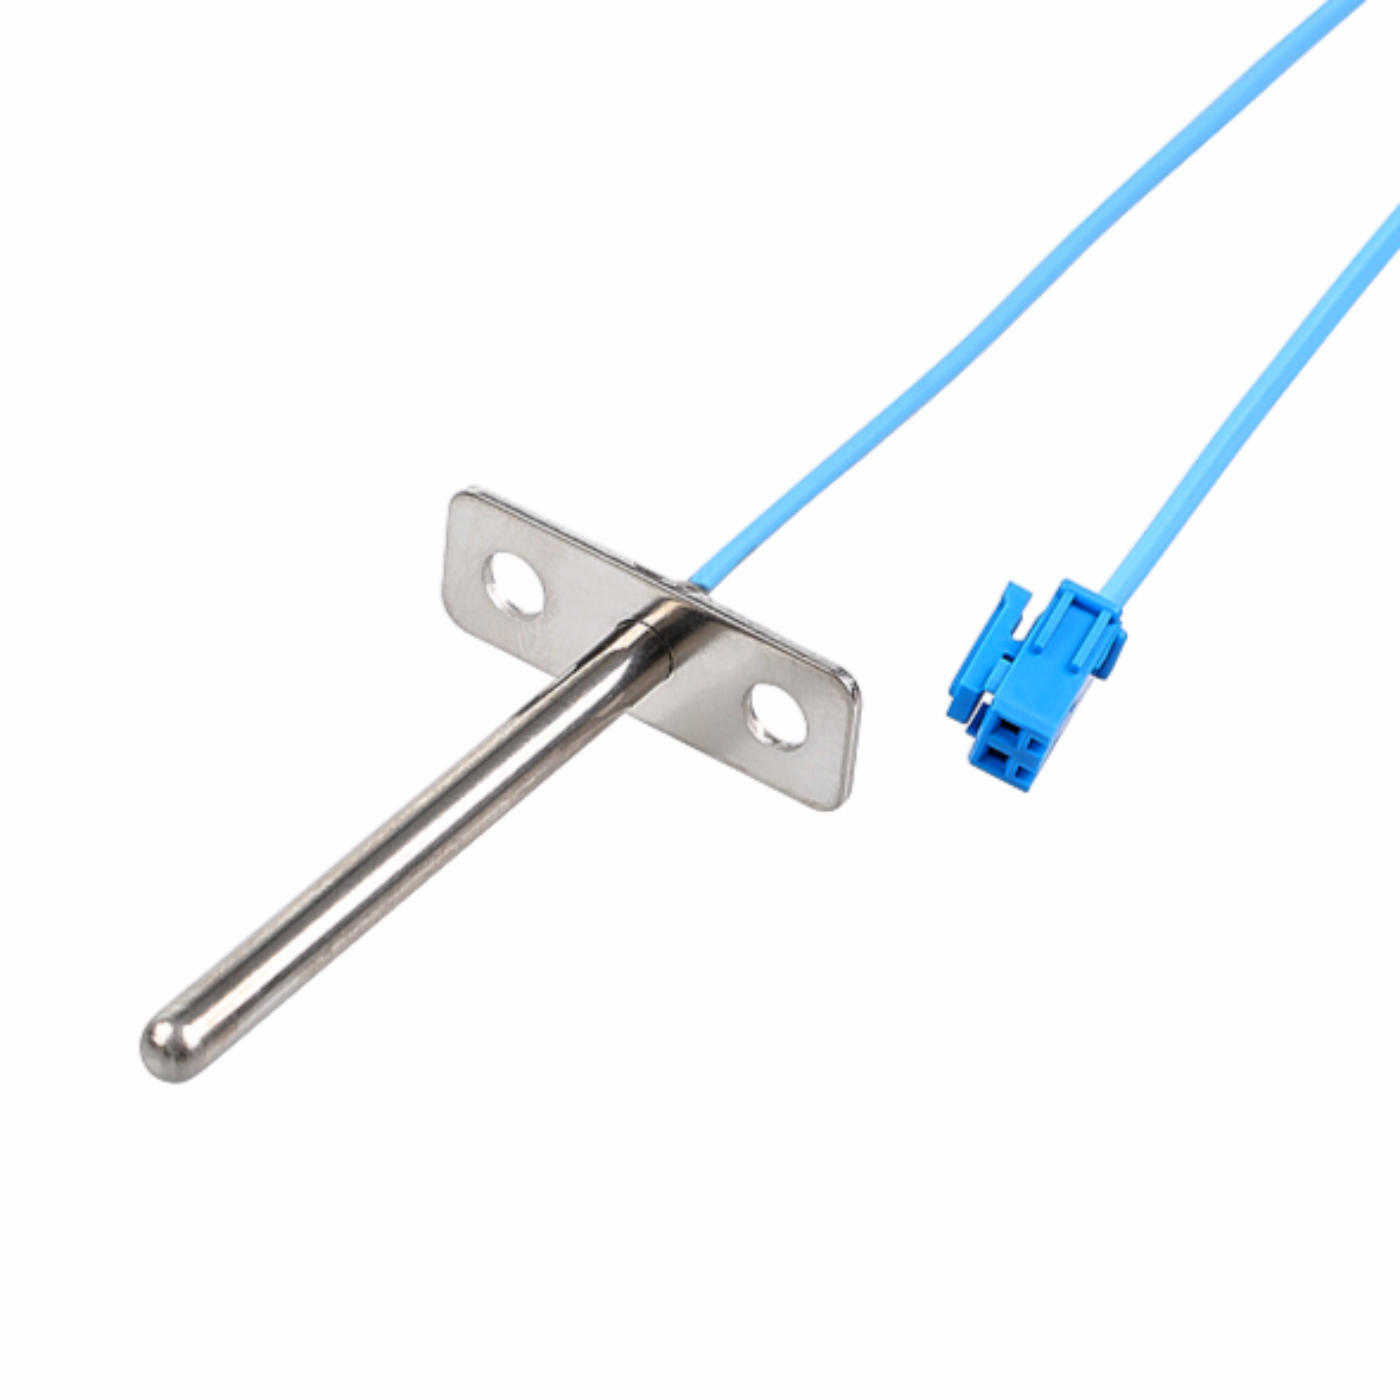 Cold Water Temperature Sensor NTC 133_5K_R4_ 3970K for Water Purifier